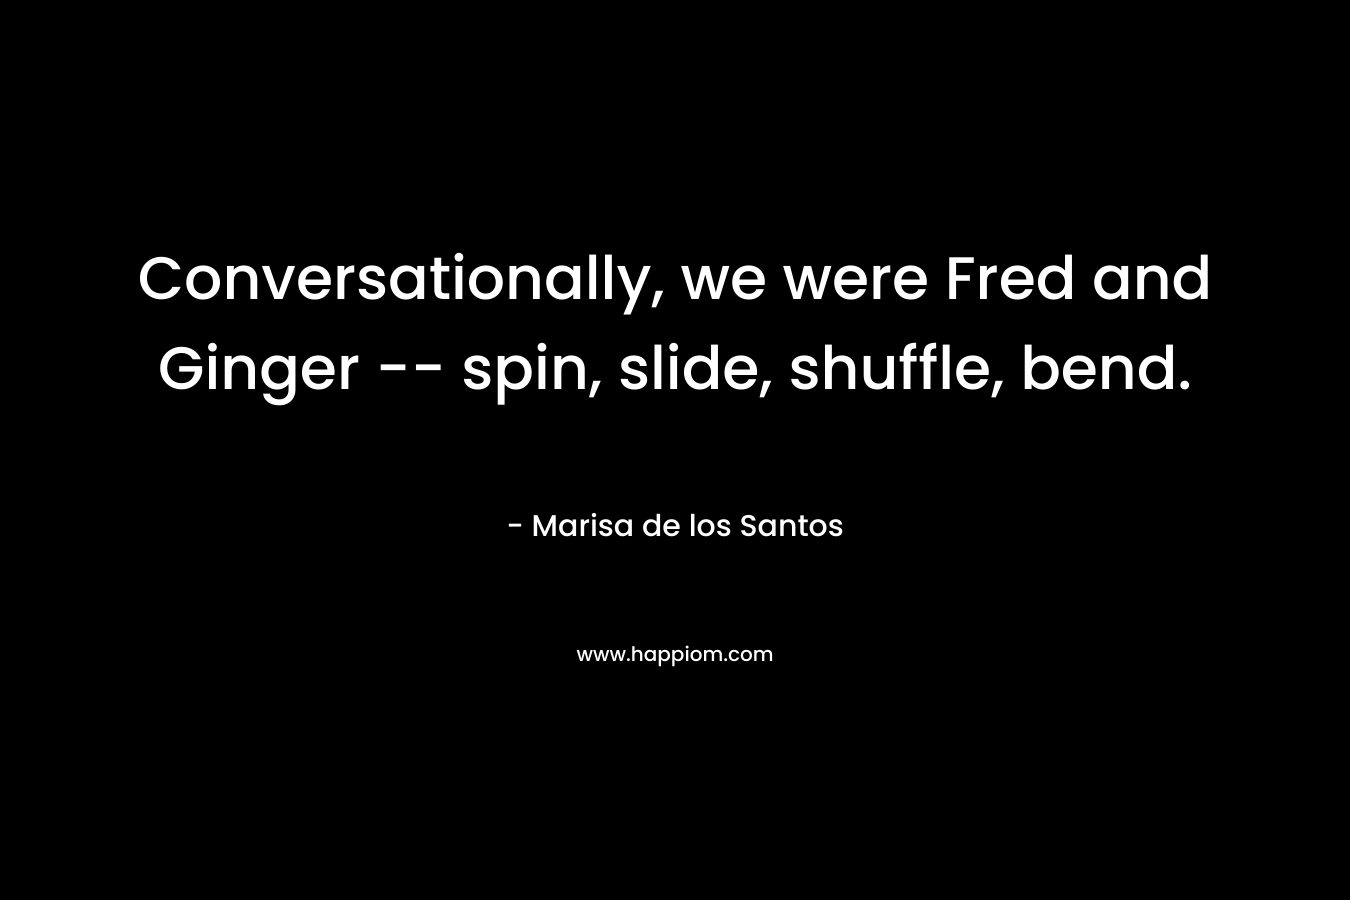 Conversationally, we were Fred and Ginger — spin, slide, shuffle, bend. – Marisa de los Santos